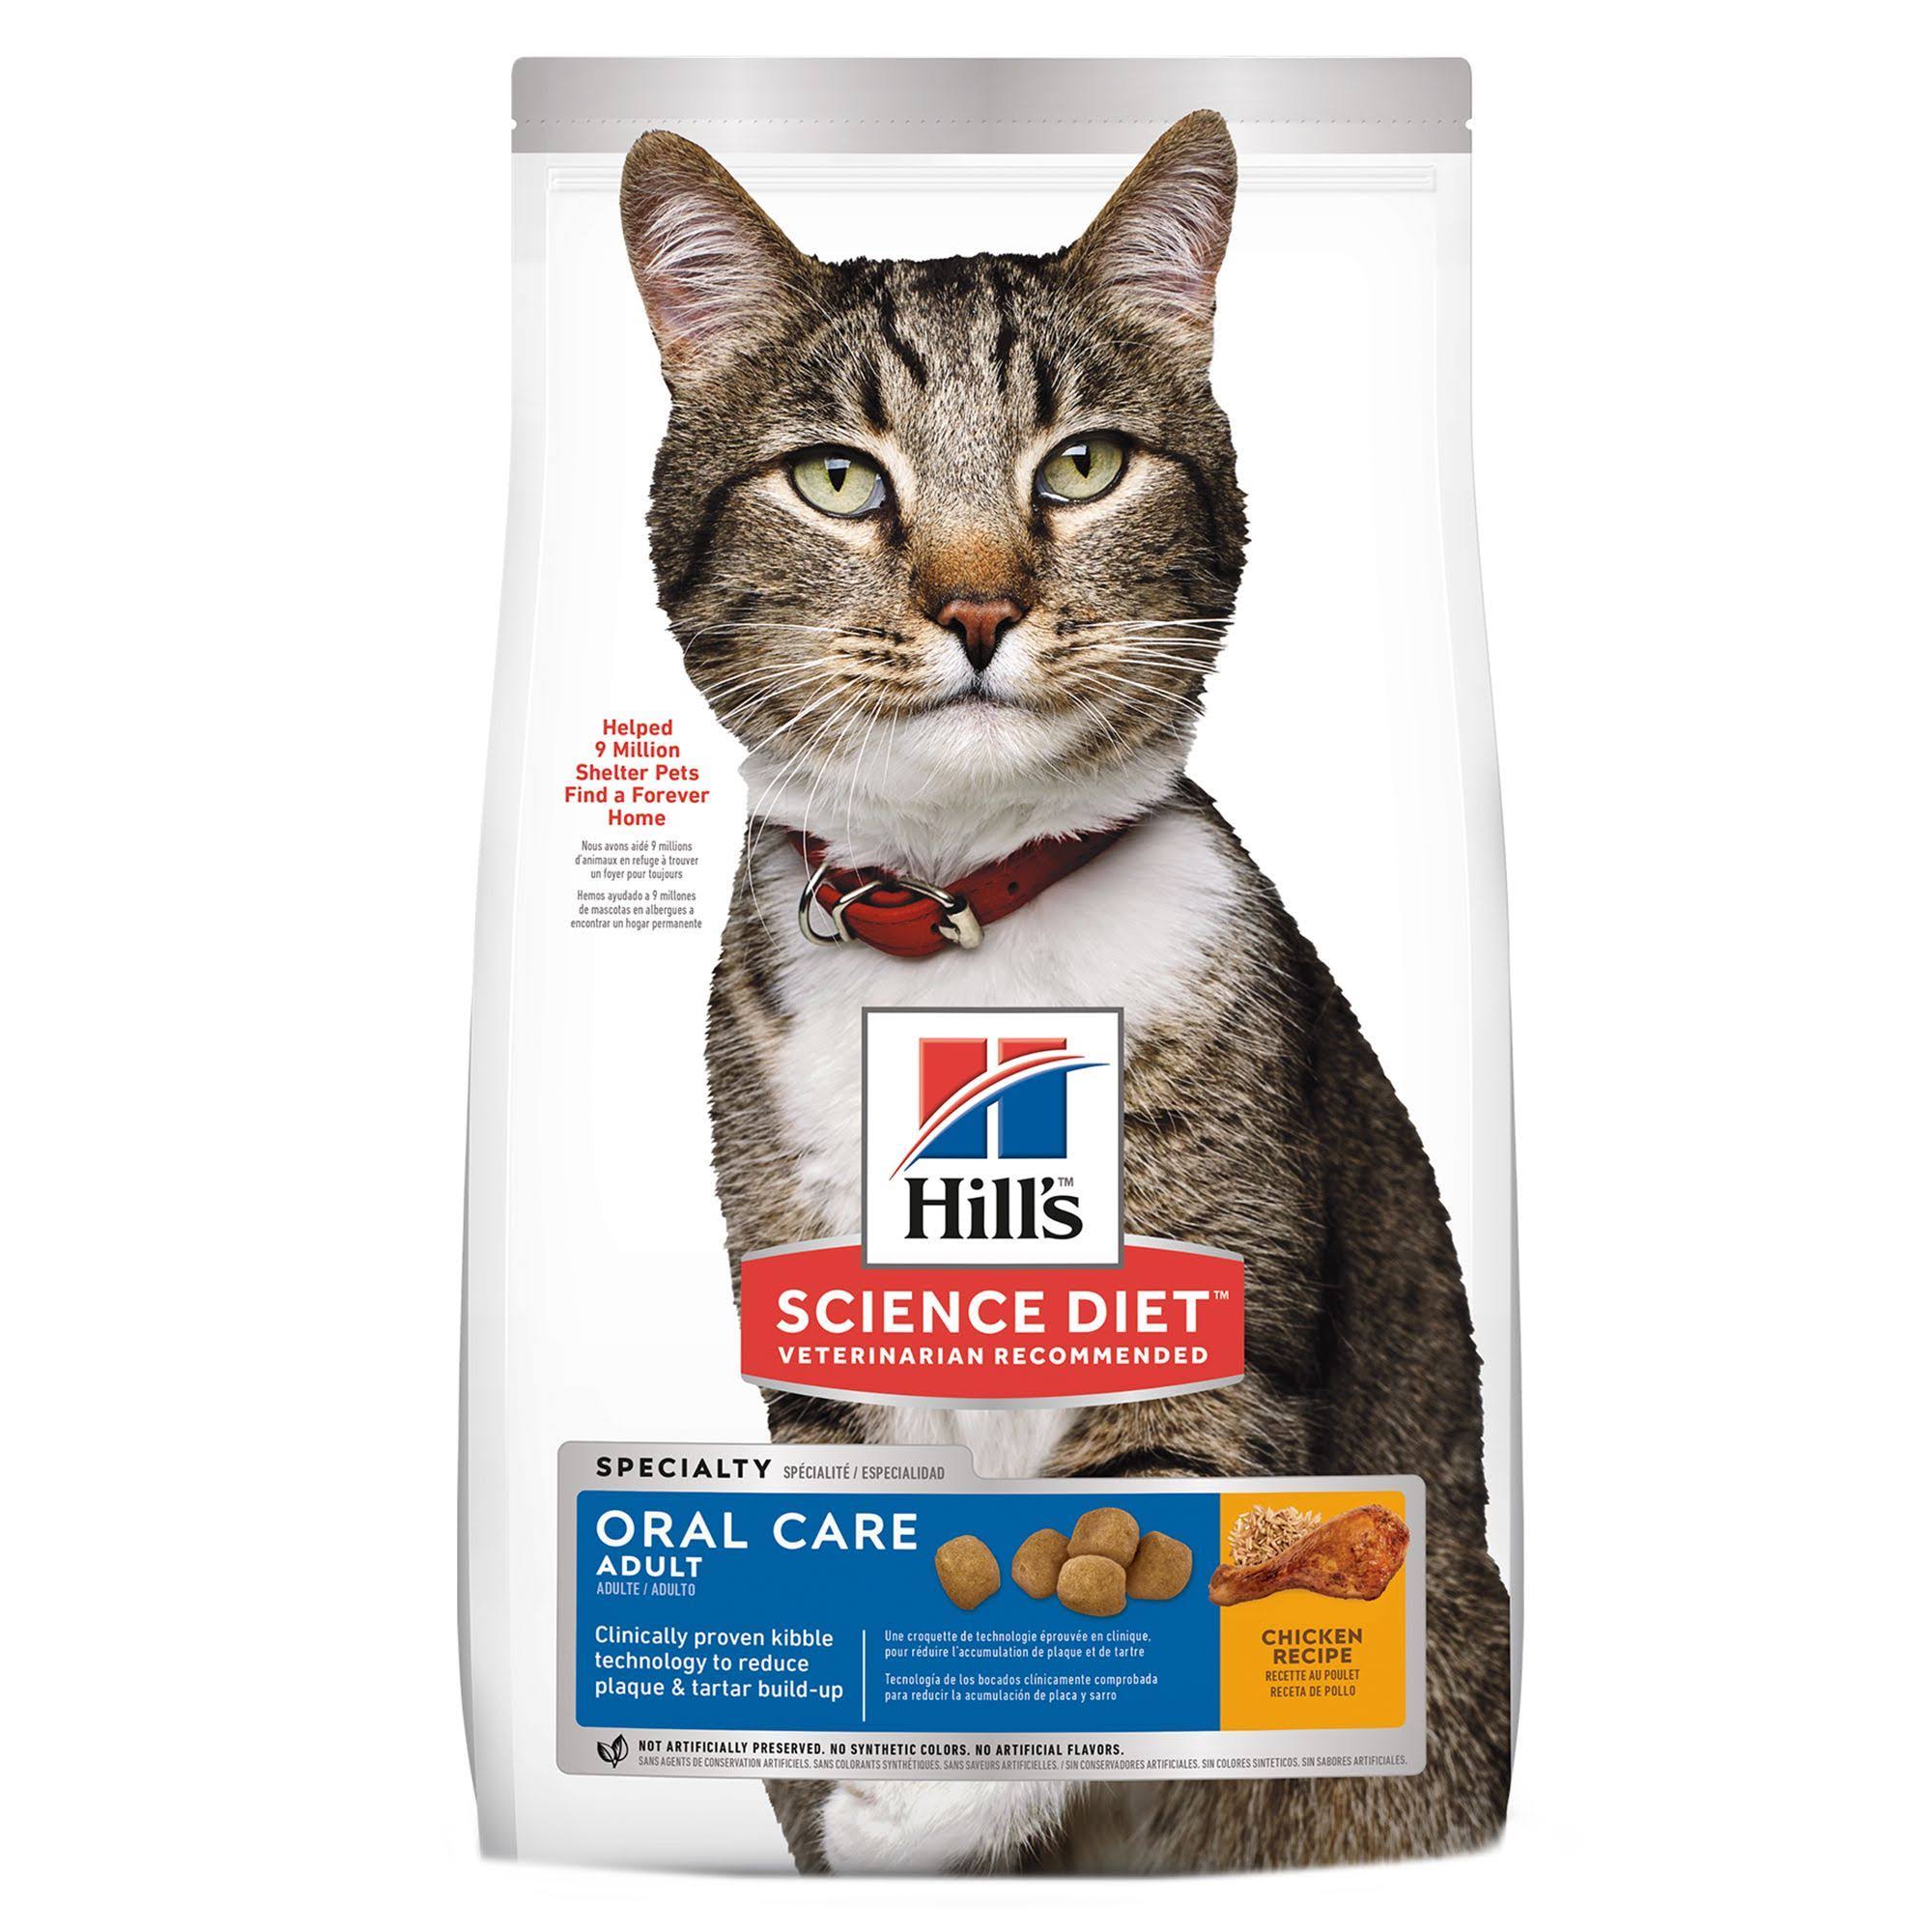 Hill's Science Diet Adult Oral Care Chicken Recipe Dry Premium Natural Cat Food